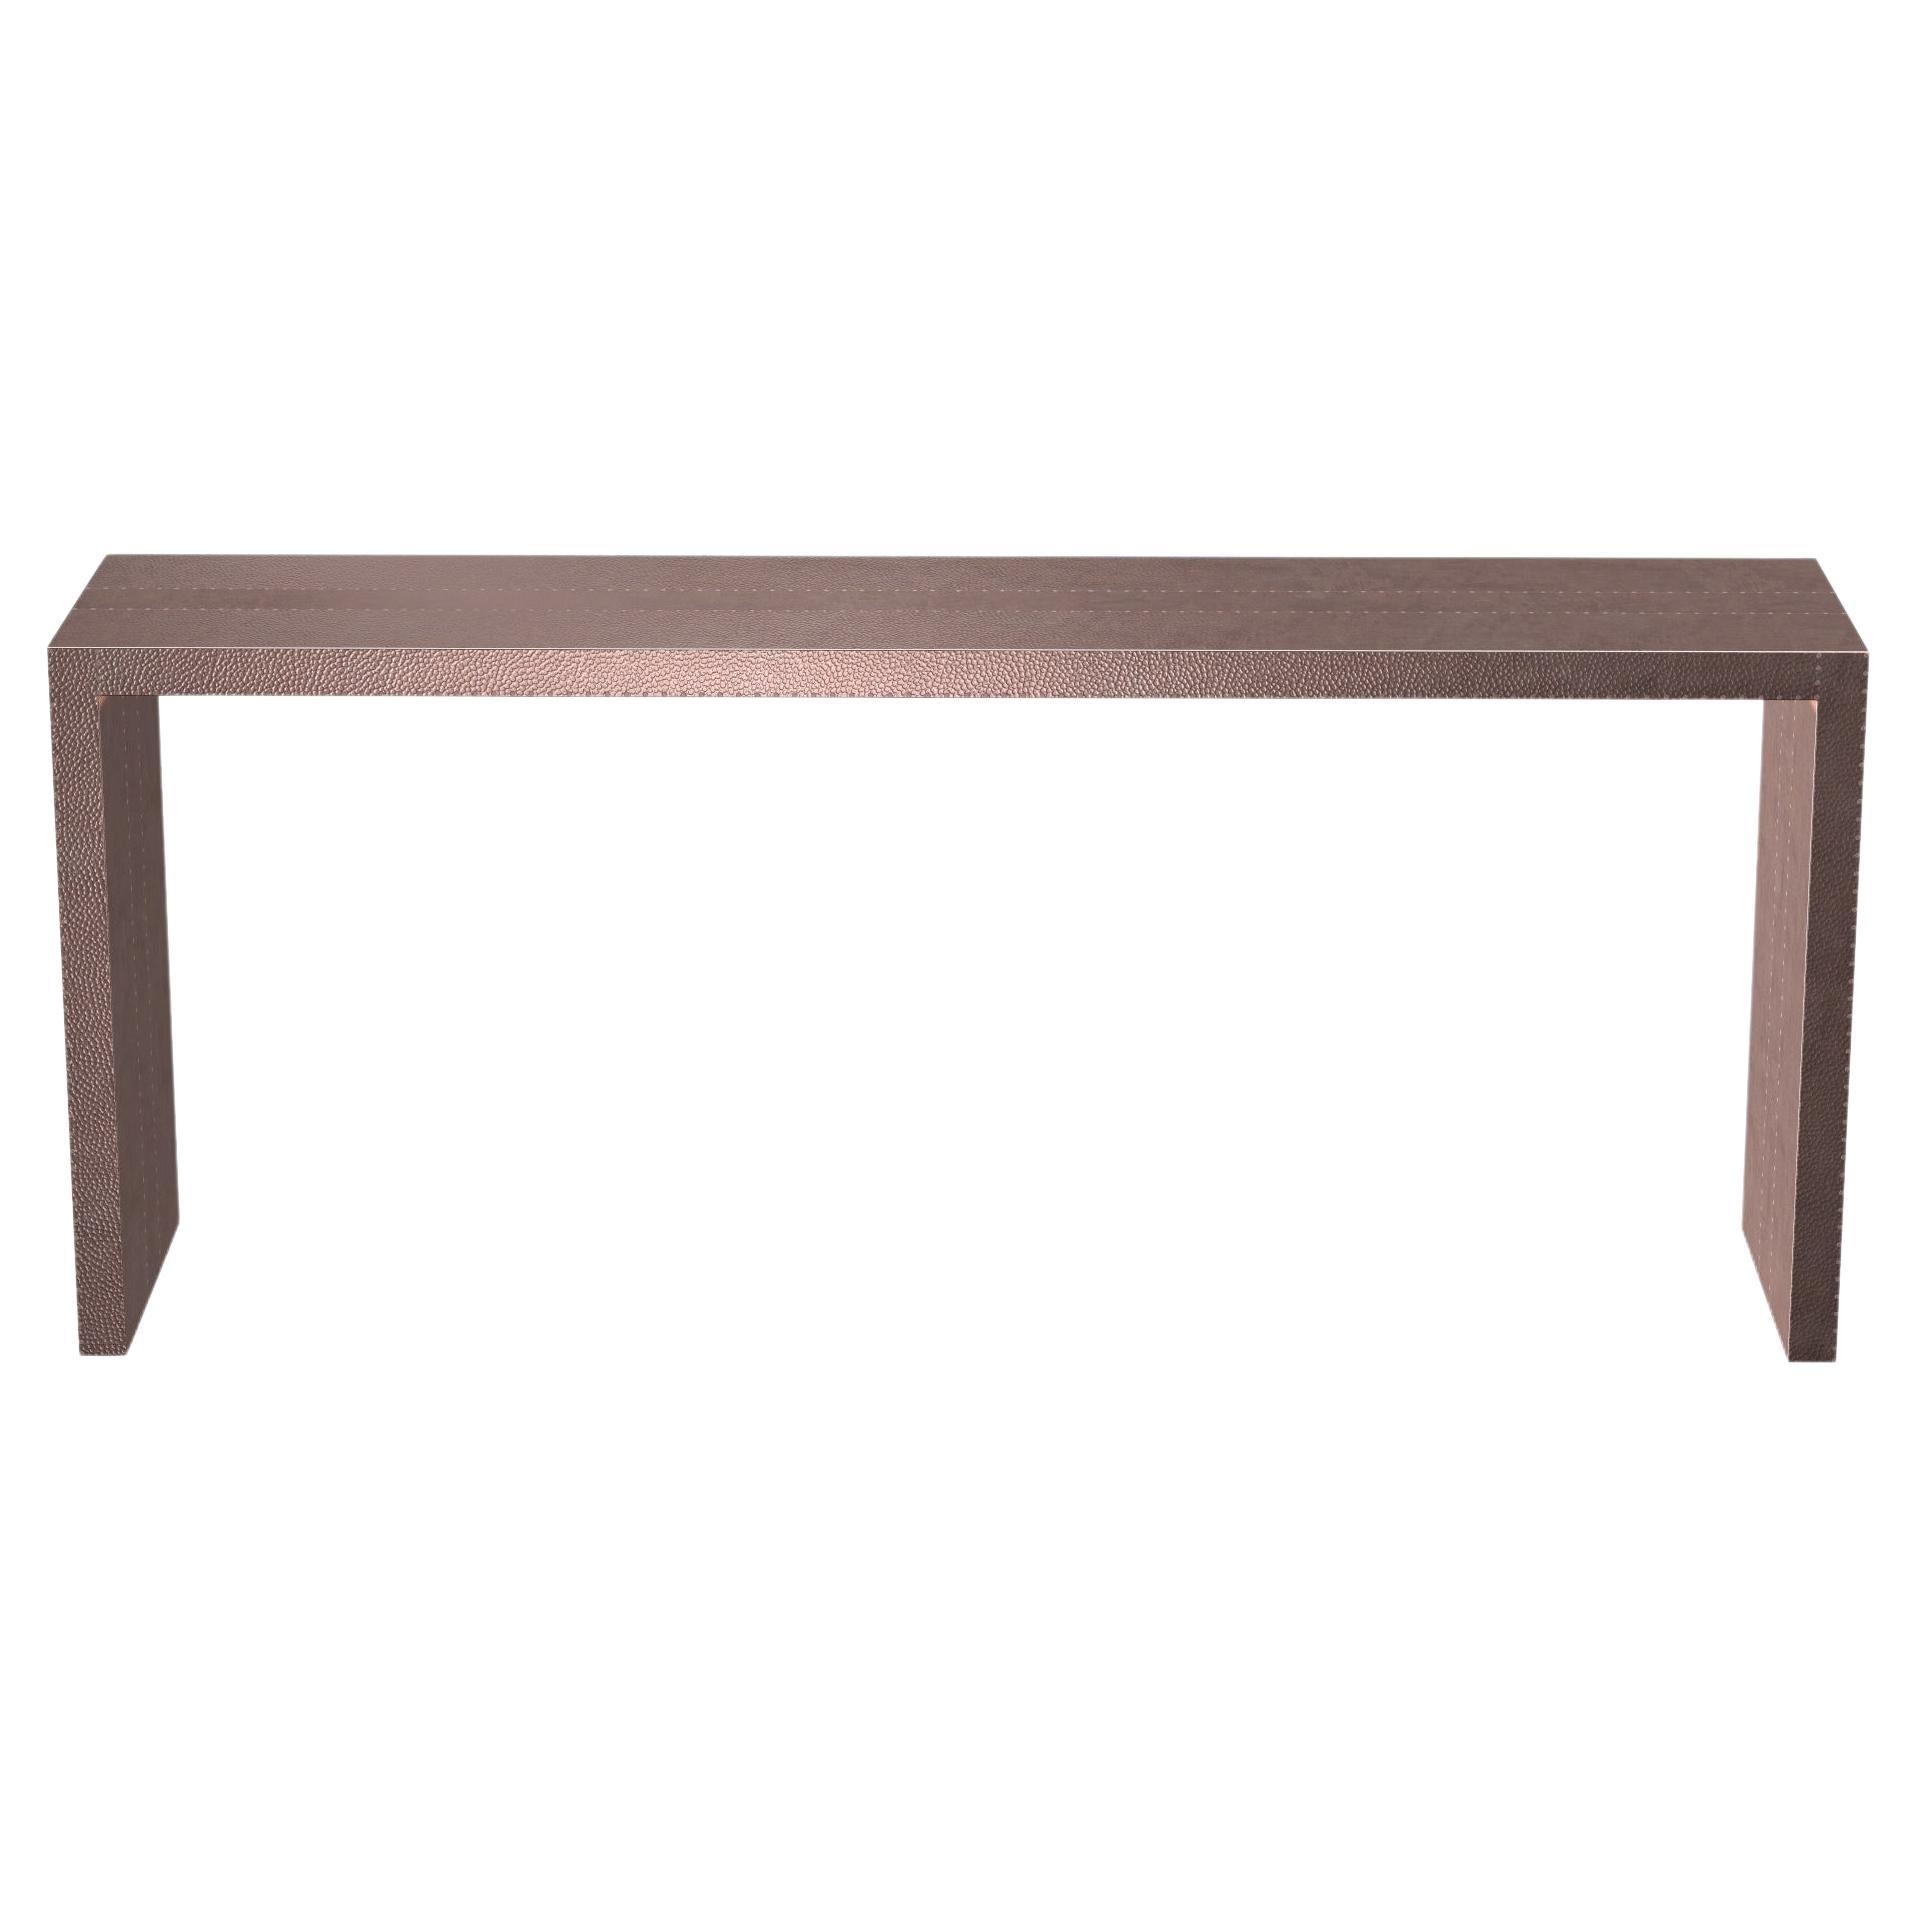 Art Deco Card Tables and Tea Console Tables Mid.Hammered in Copper  by Alison S